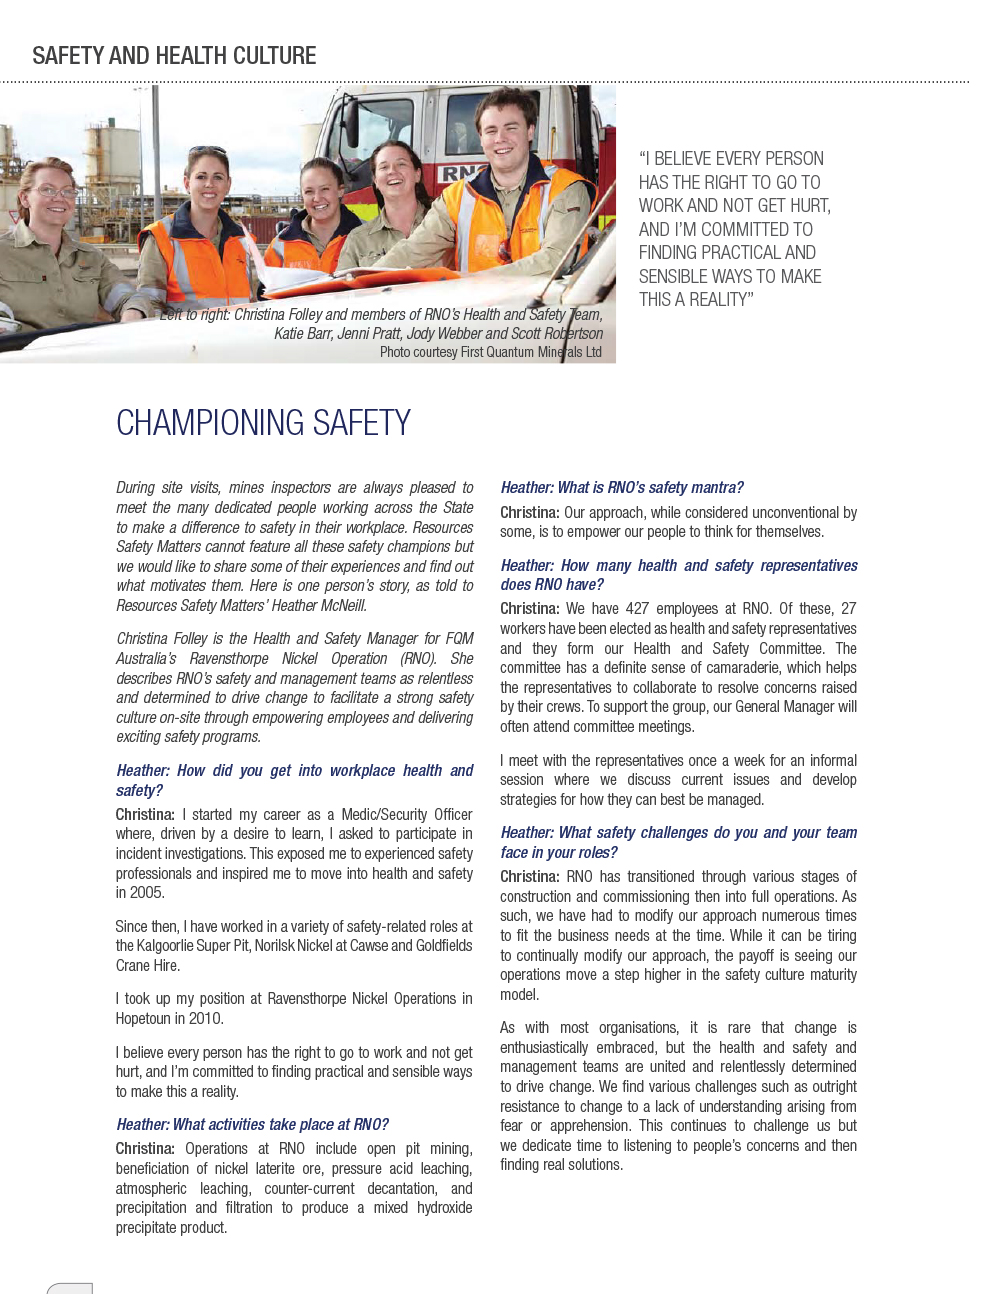 Resources Safety Matters Volume 2 No. 2 May 2014